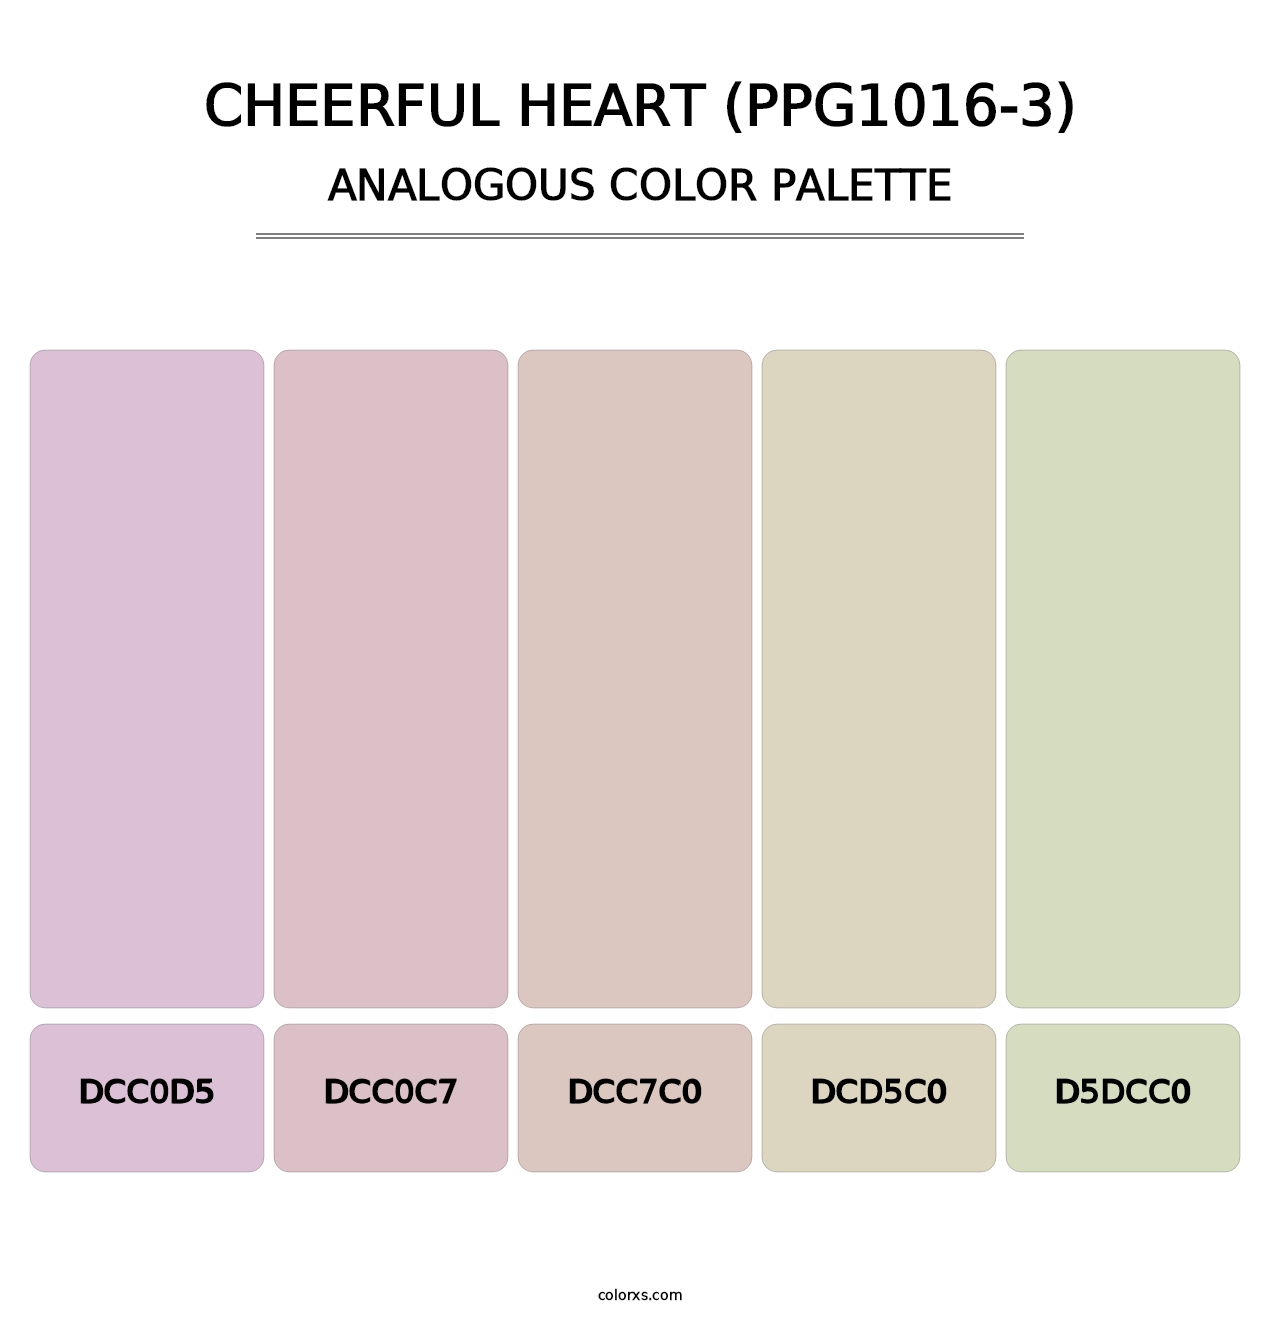 Cheerful Heart (PPG1016-3) - Analogous Color Palette